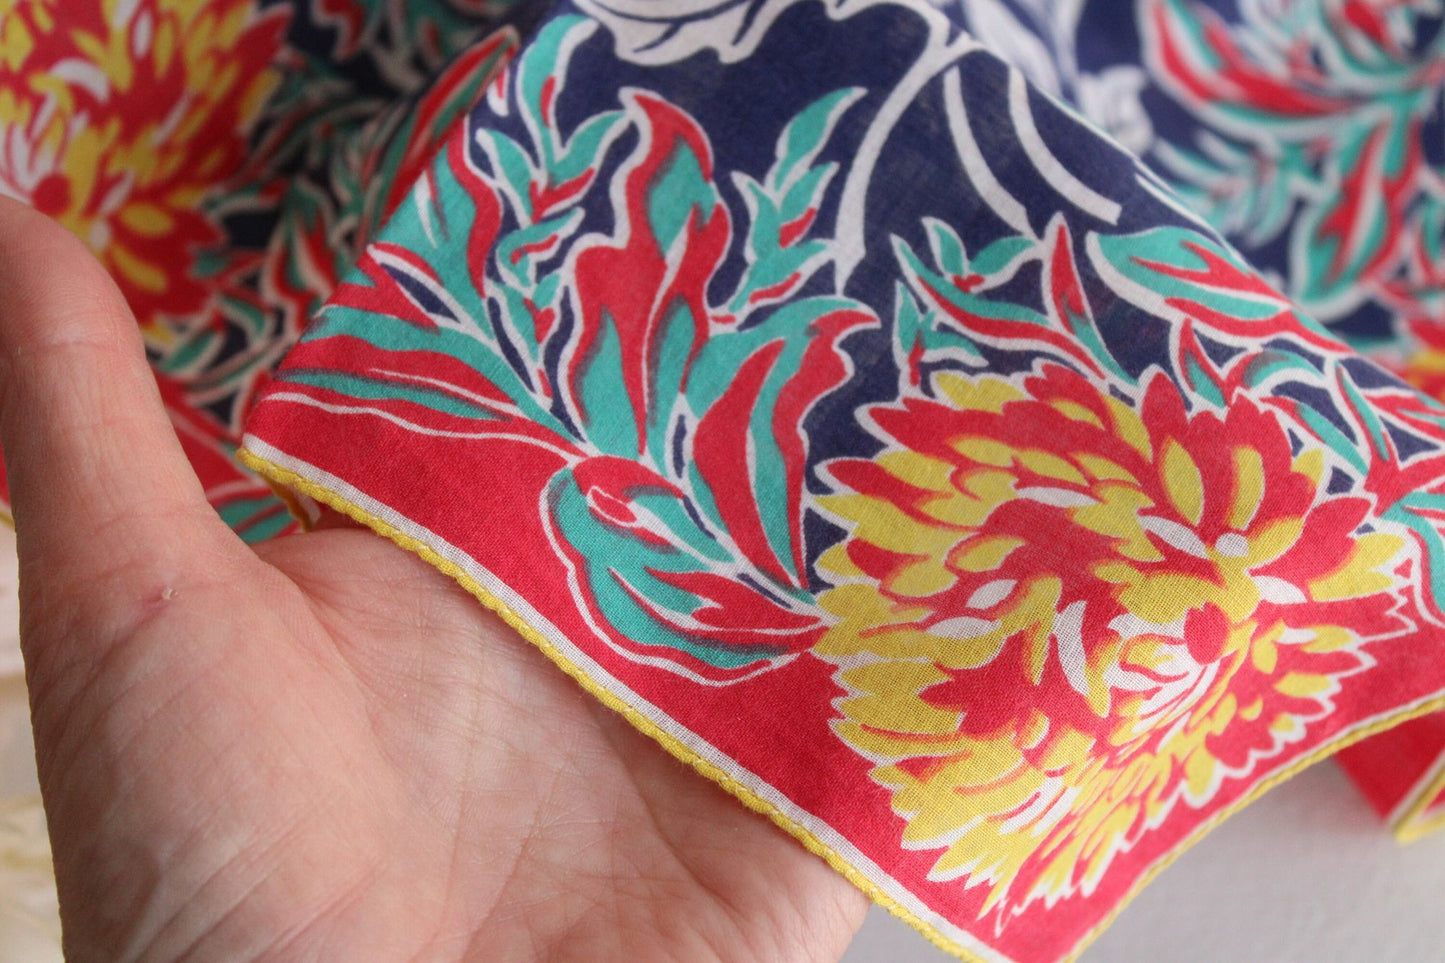 Vintage 1940s Red Blue and Yellow Floral and Leaf Print Hankie